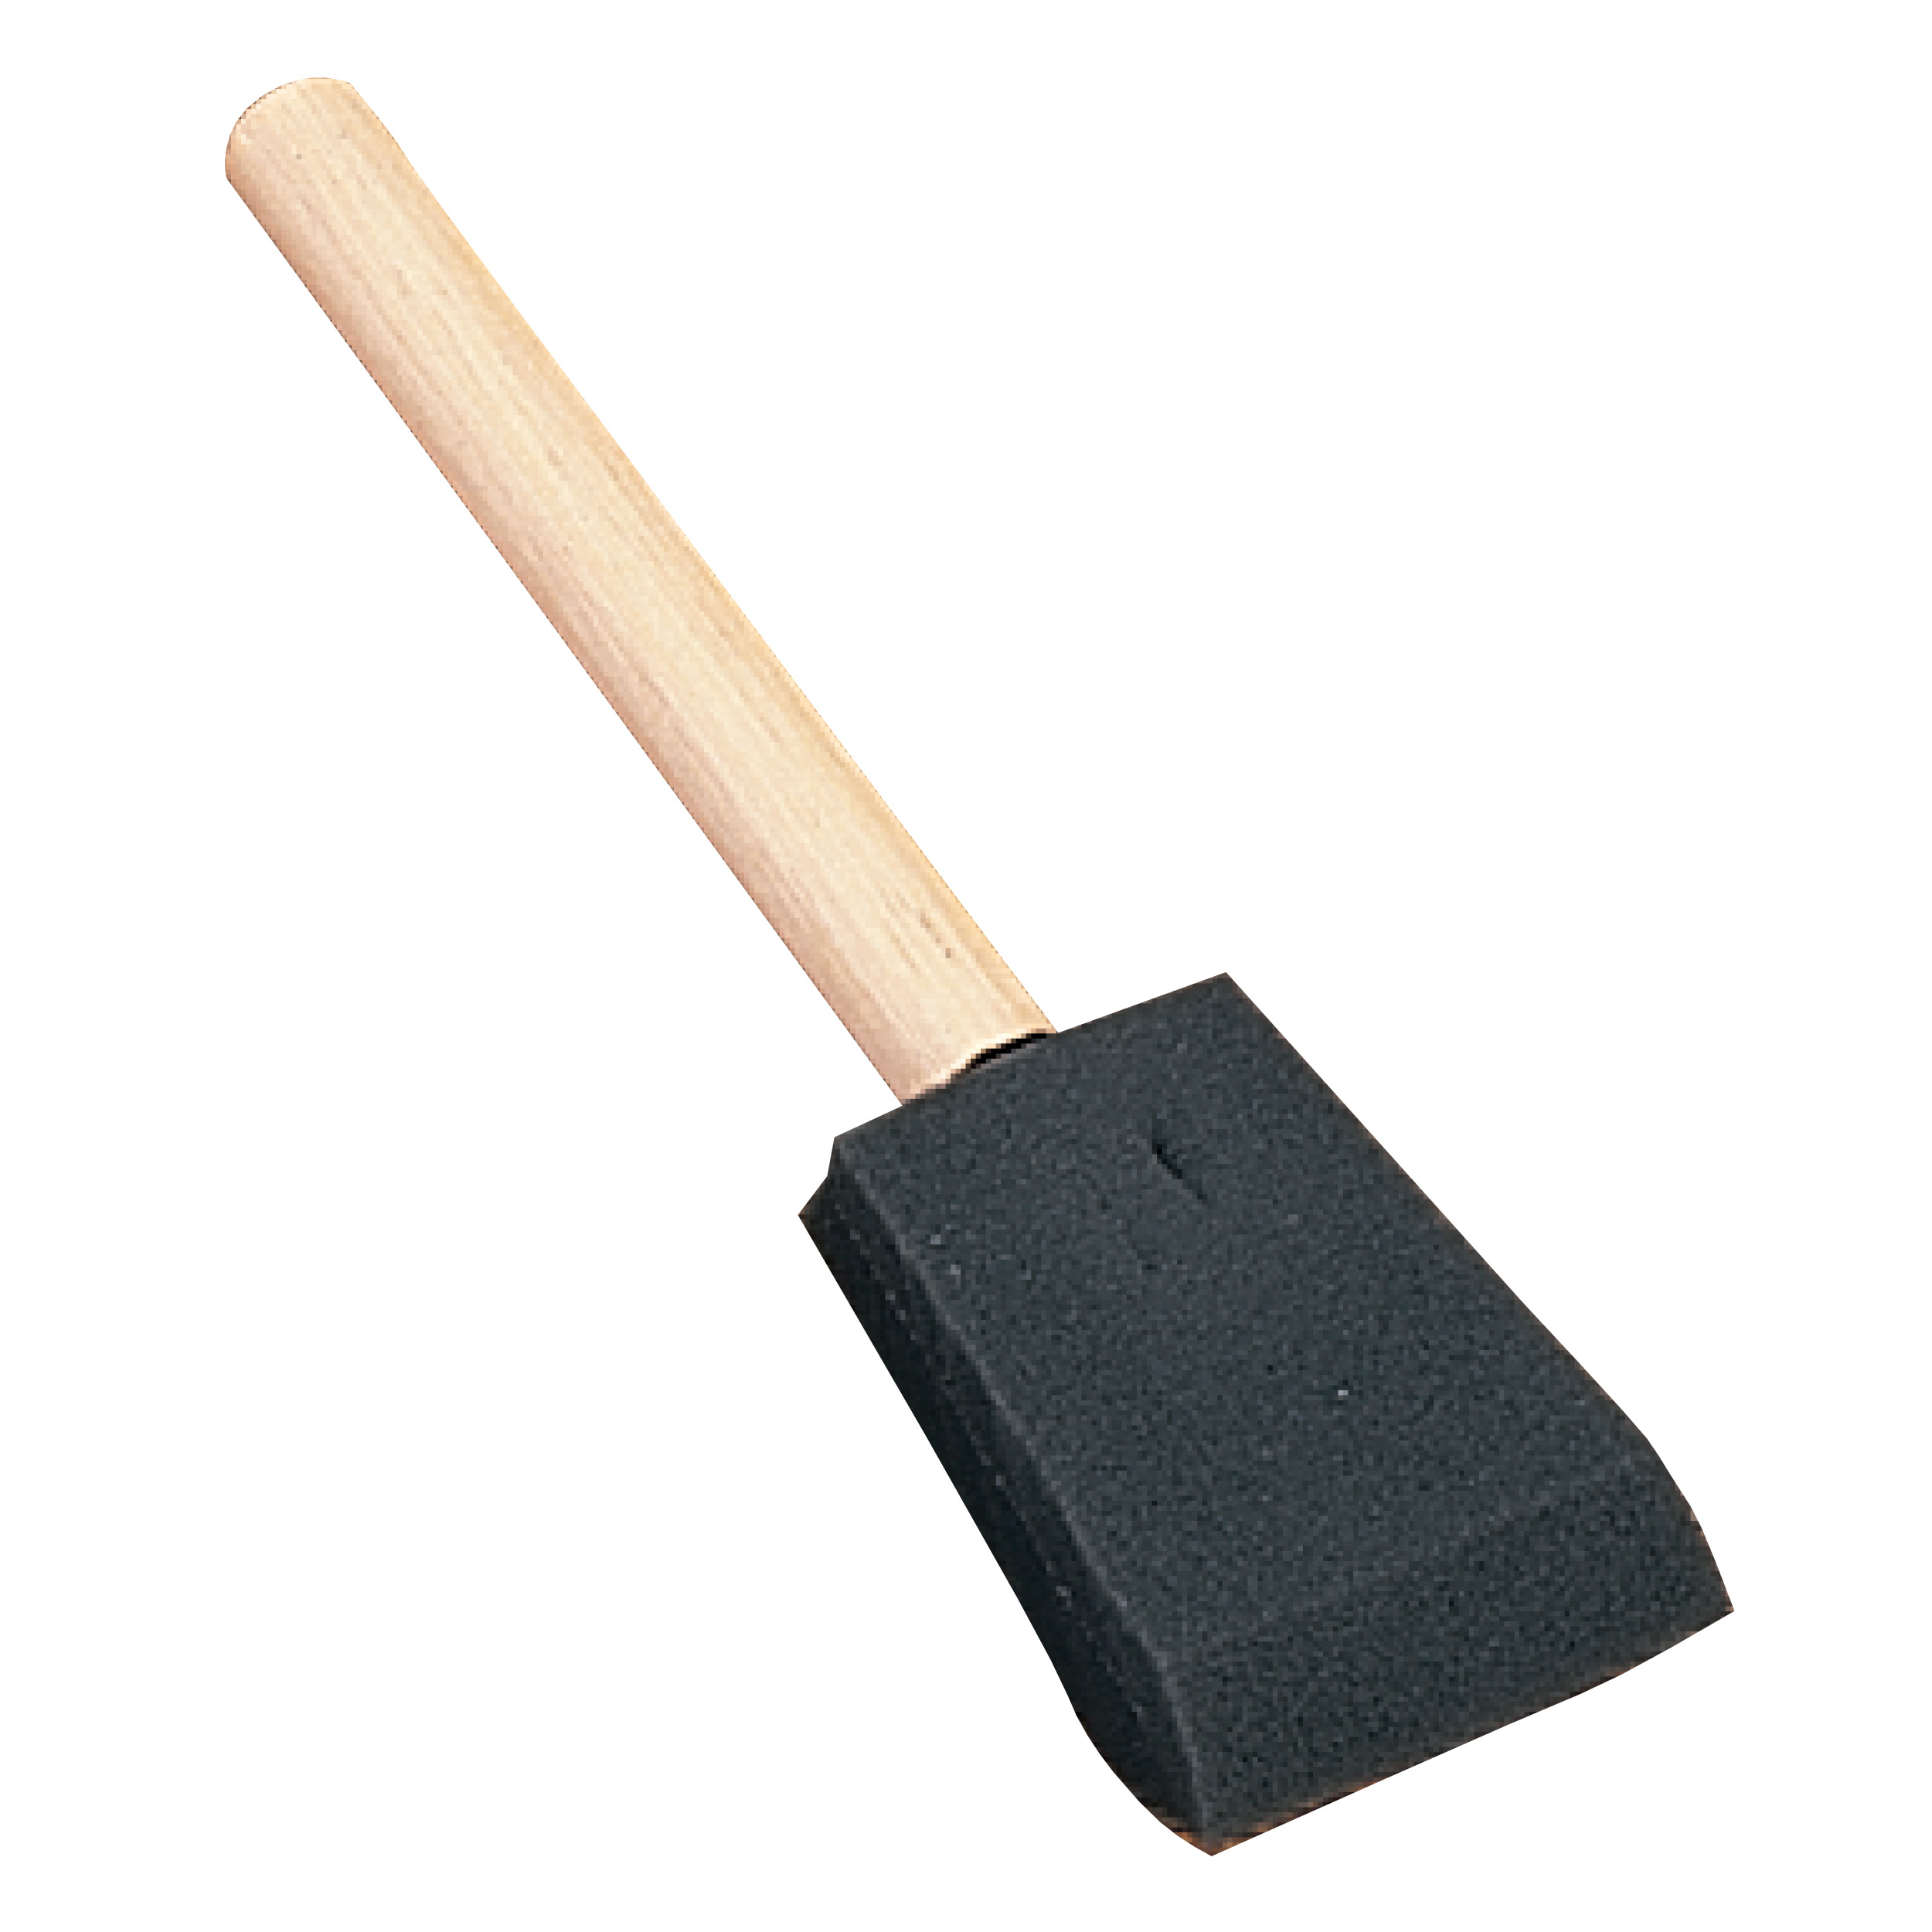 1" Wooden Handle Foam Brushes, 10-pack